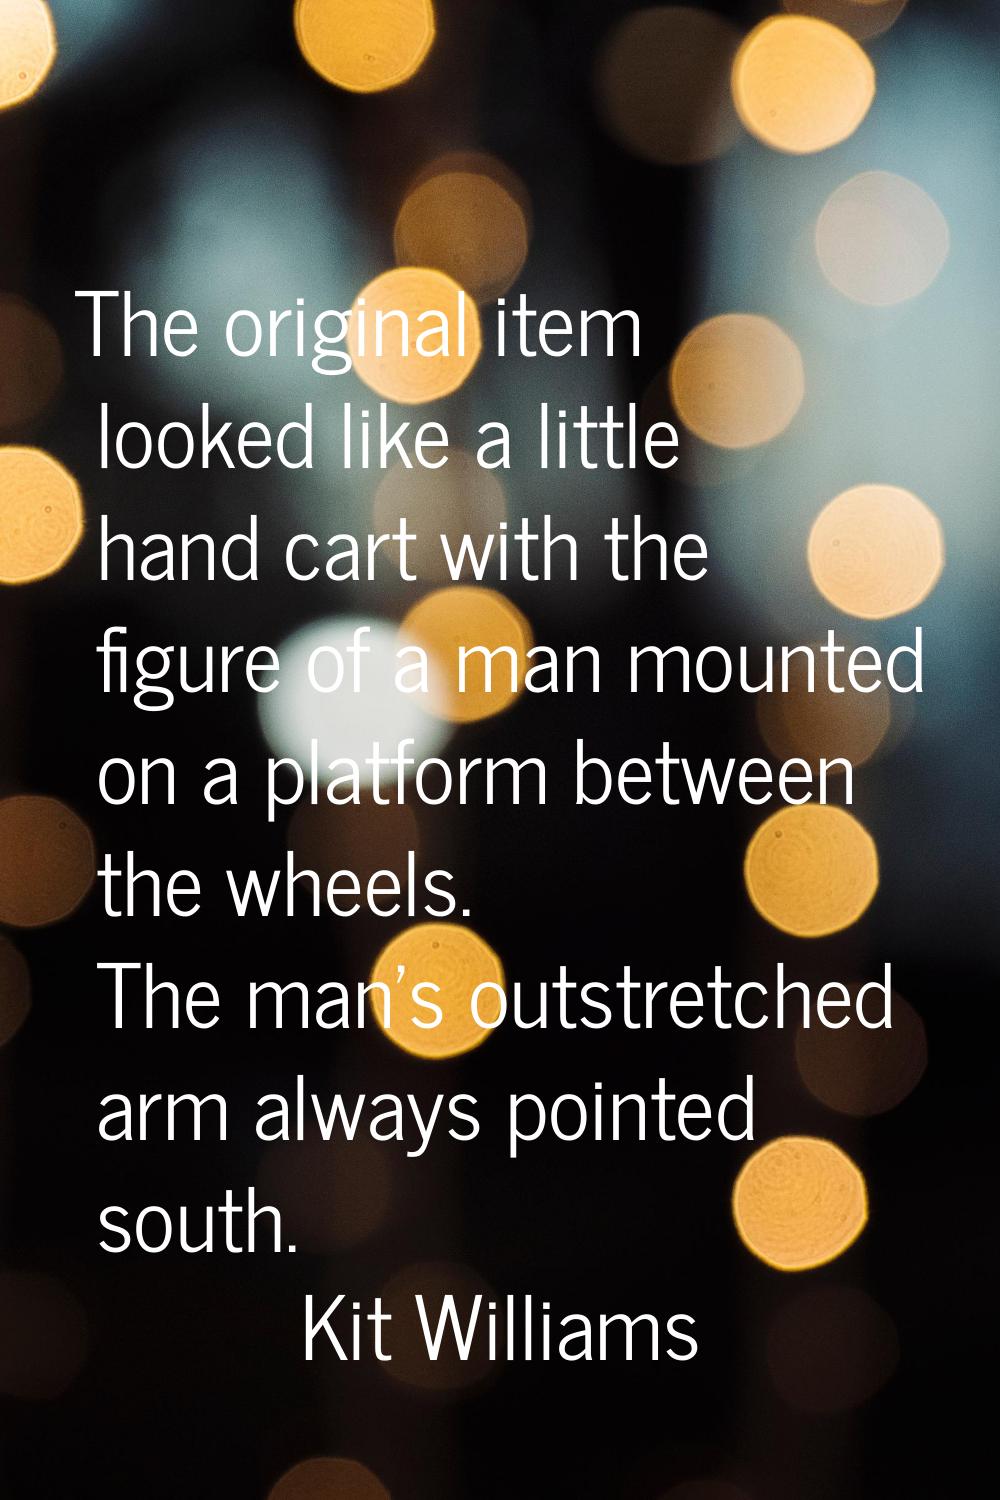 The original item looked like a little hand cart with the figure of a man mounted on a platform bet